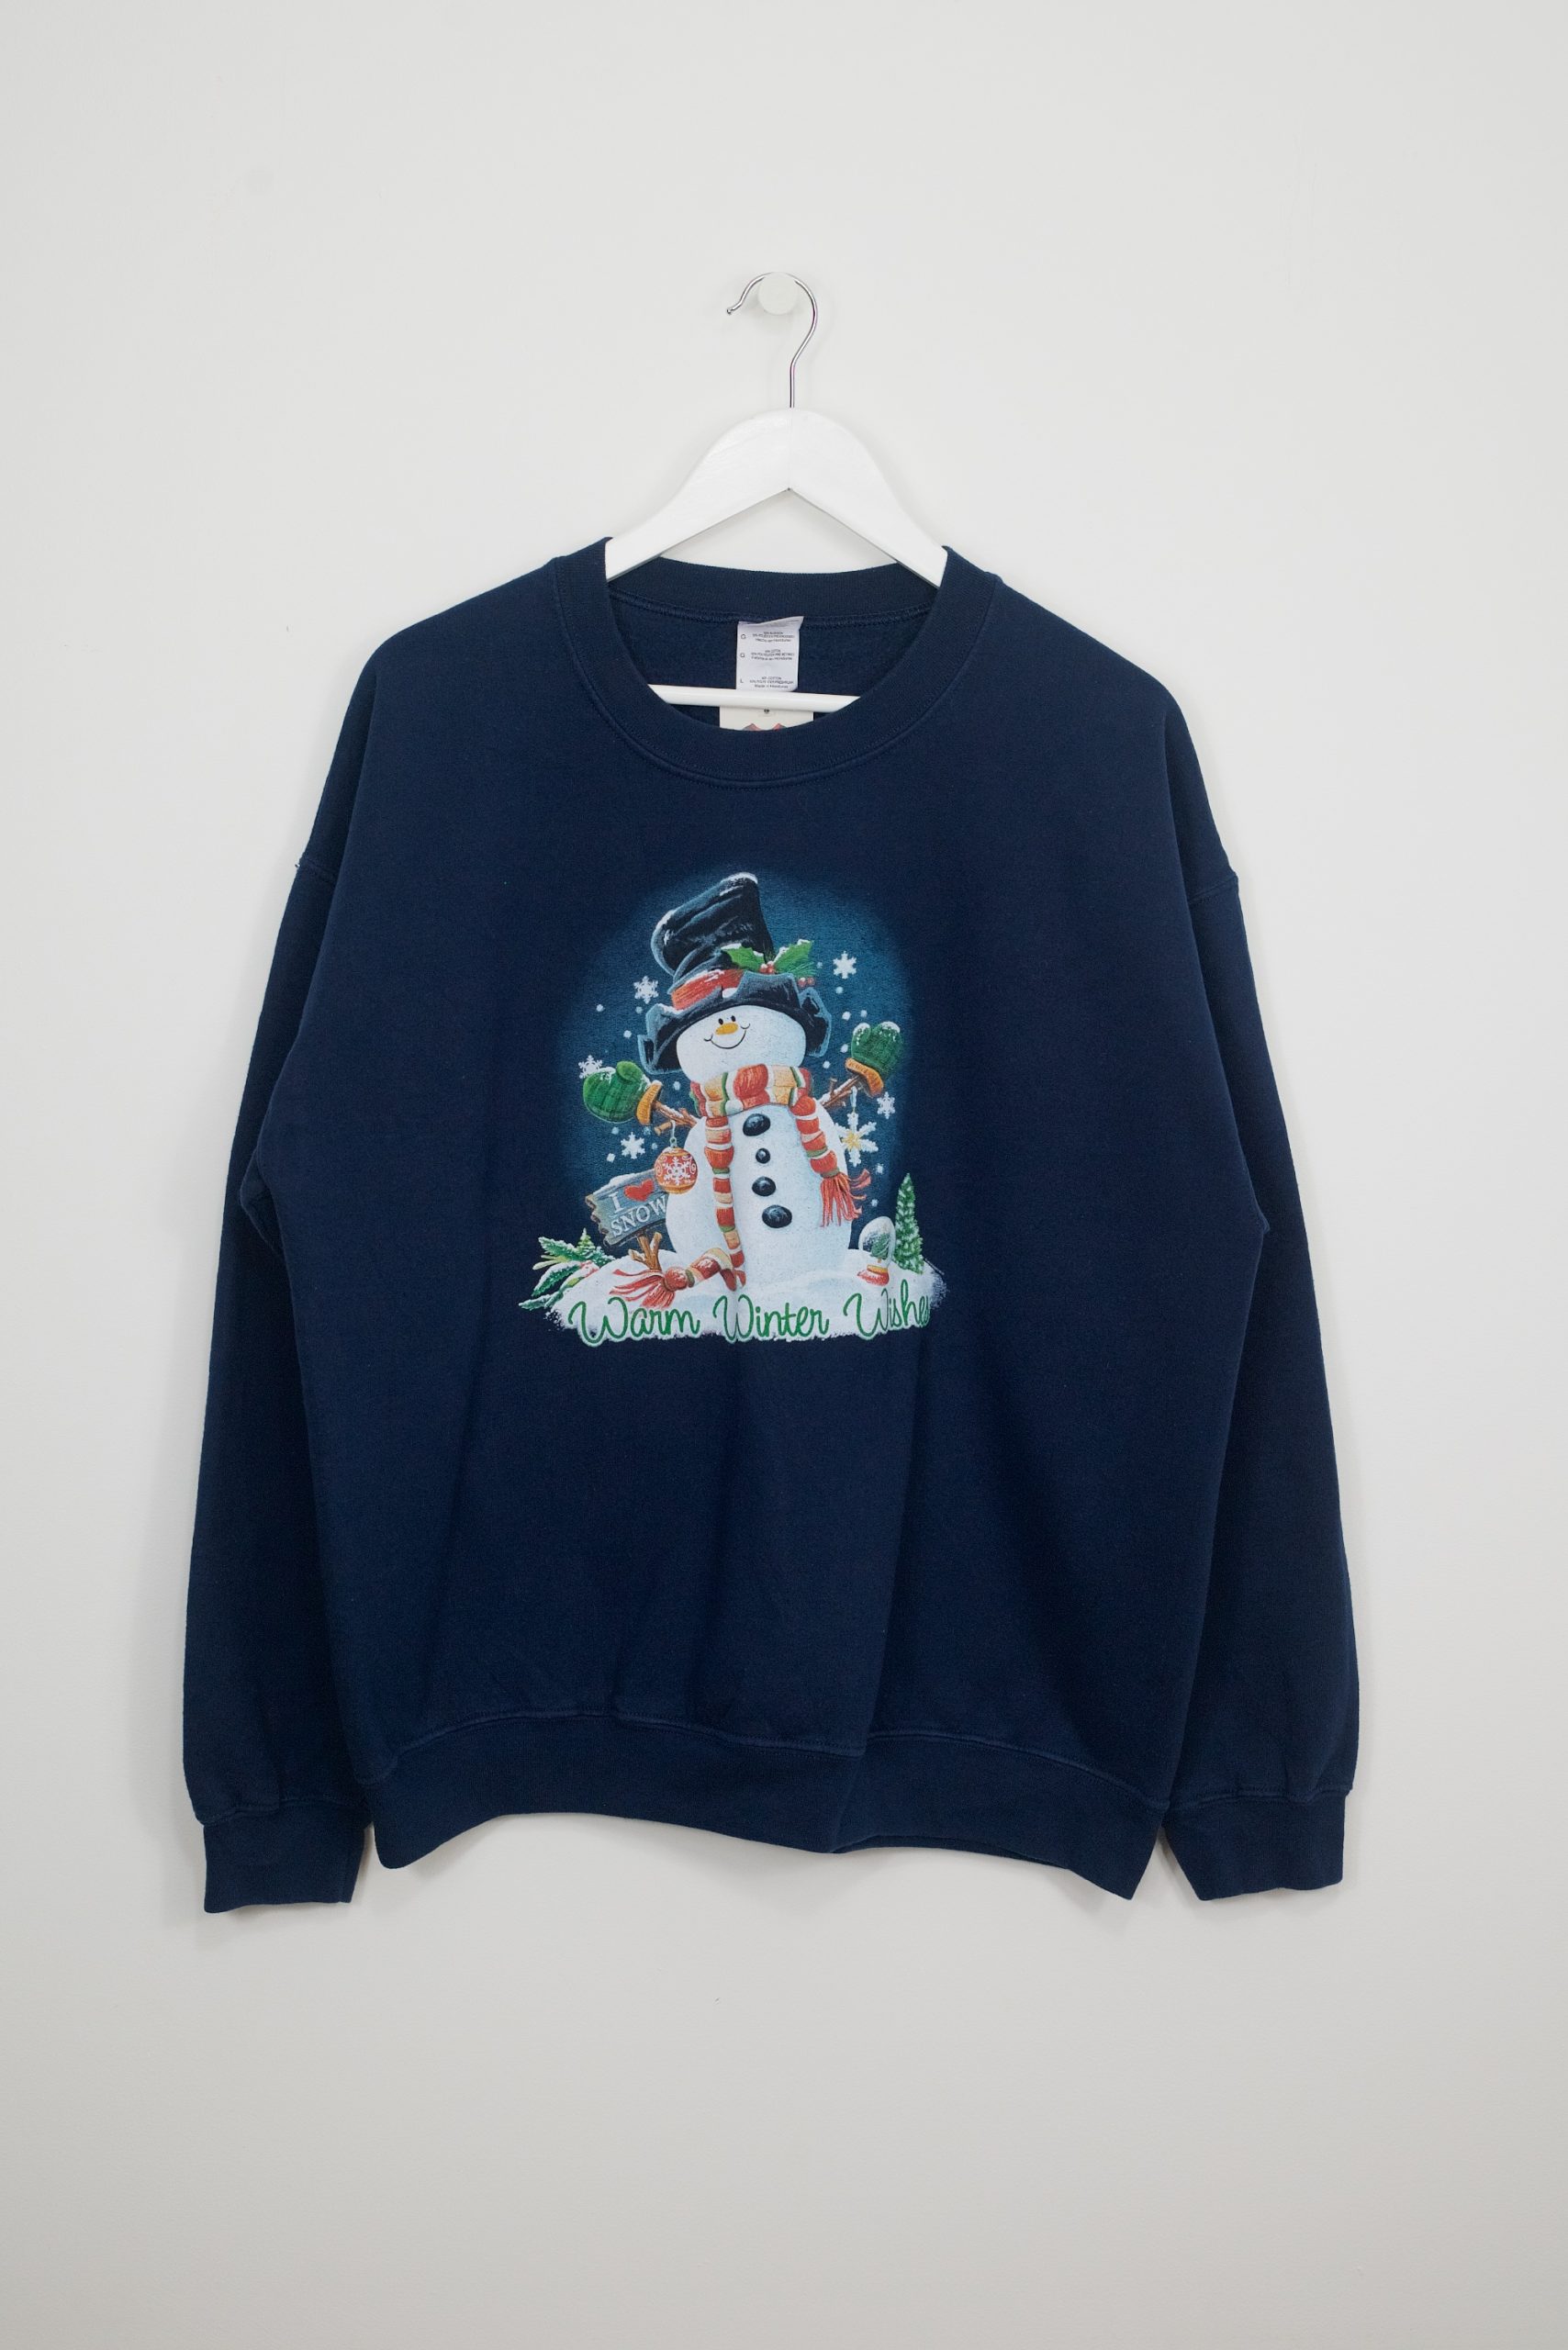 Warm Winter Wishes Christmas Sweater | Save the Children Shop